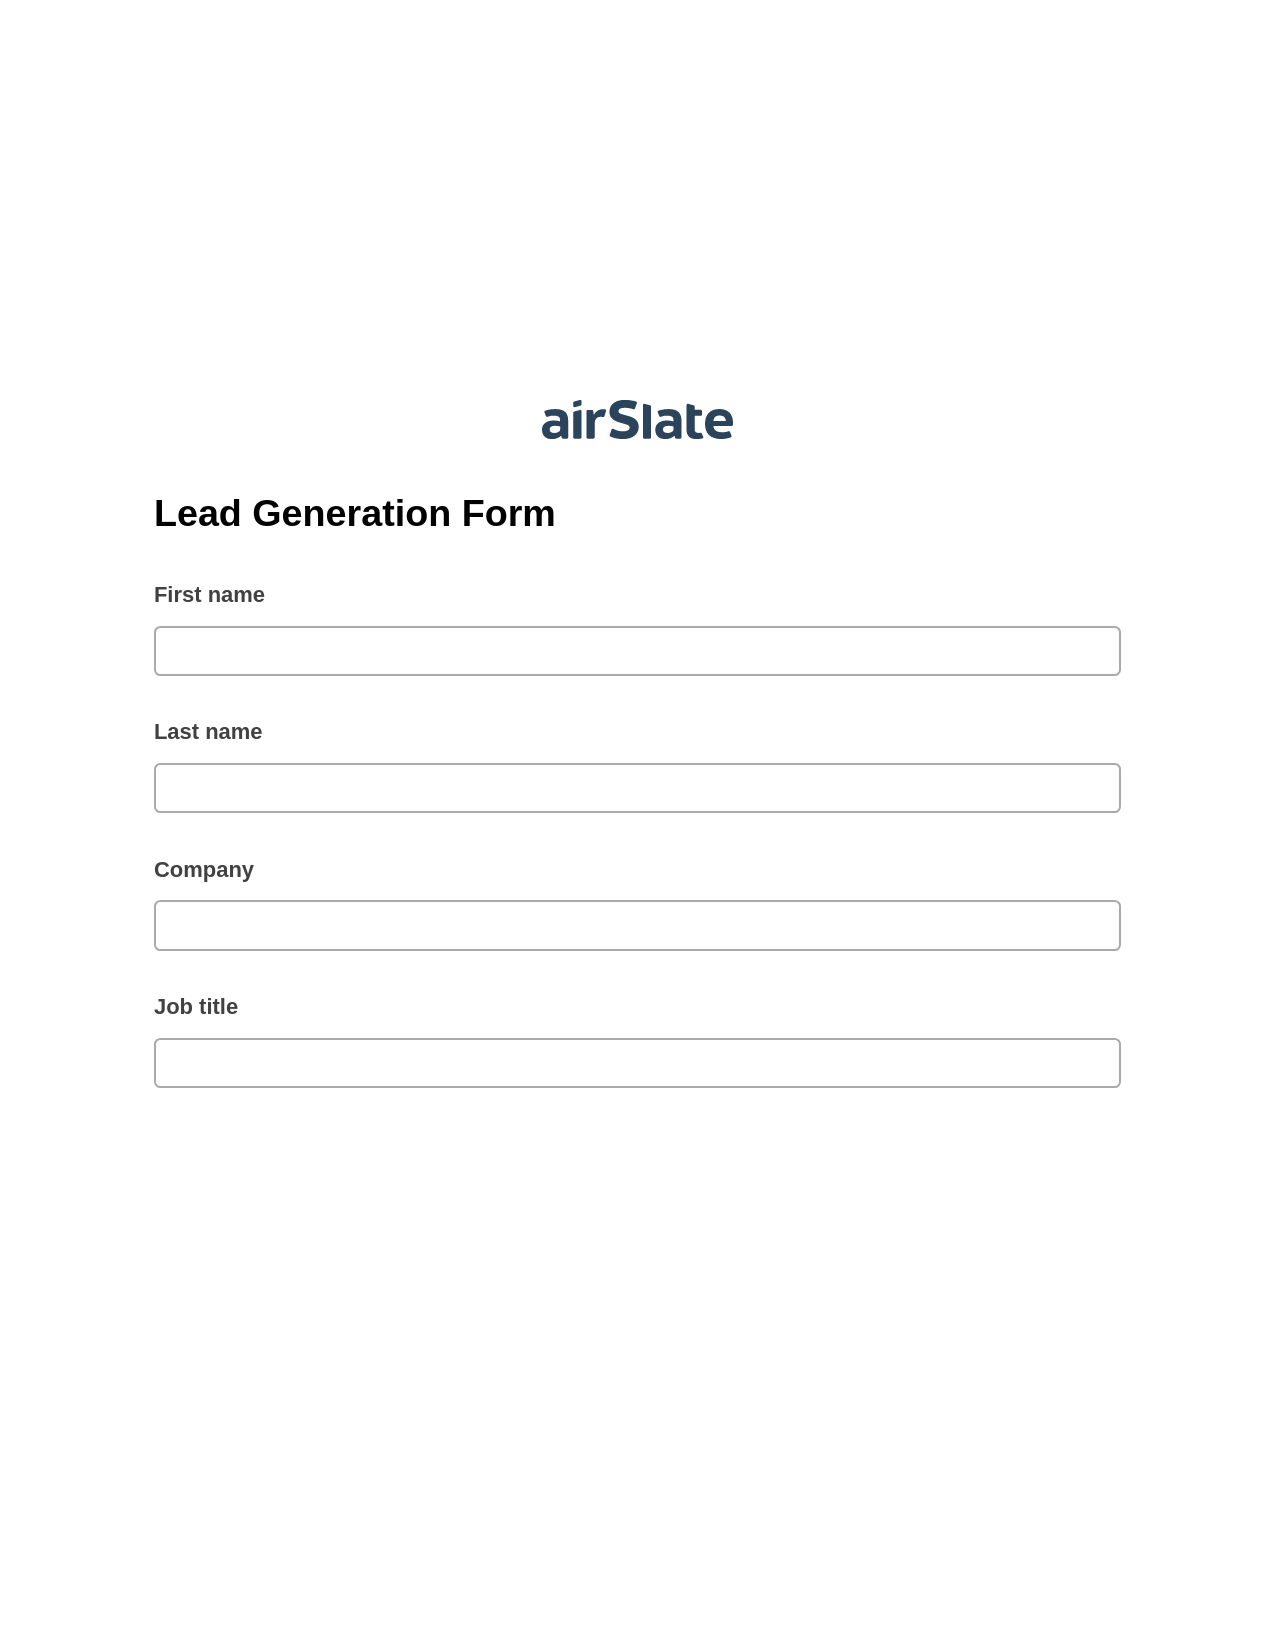 Lead Generation Form Pre-fill from Google Sheets Bot, Webhook Bot, Export to Smartsheet